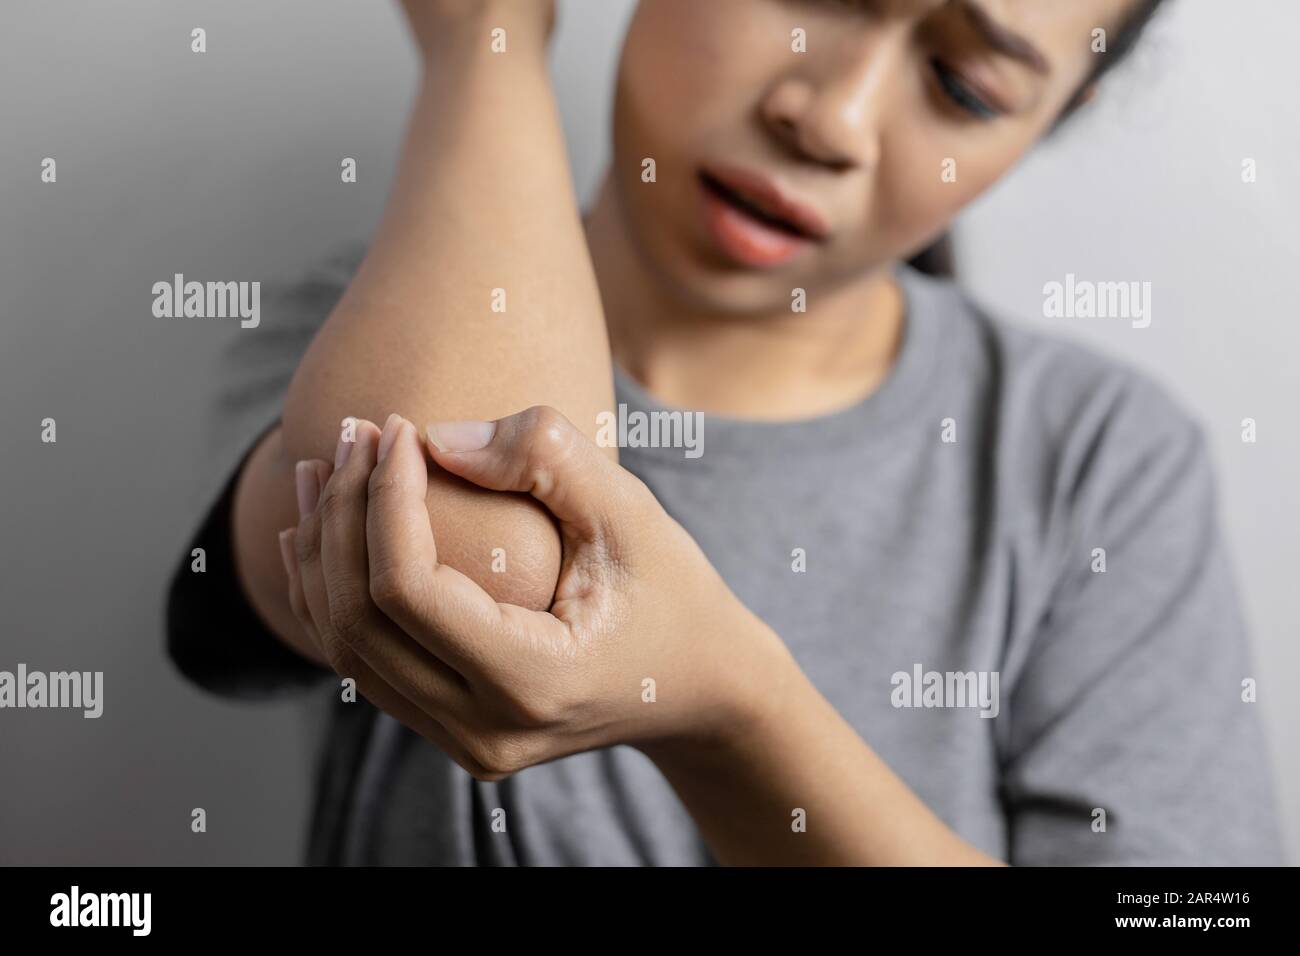 Women with pain in elbow. Acute pain in a elbow. Young woman holds on to elbow. Stock Photo